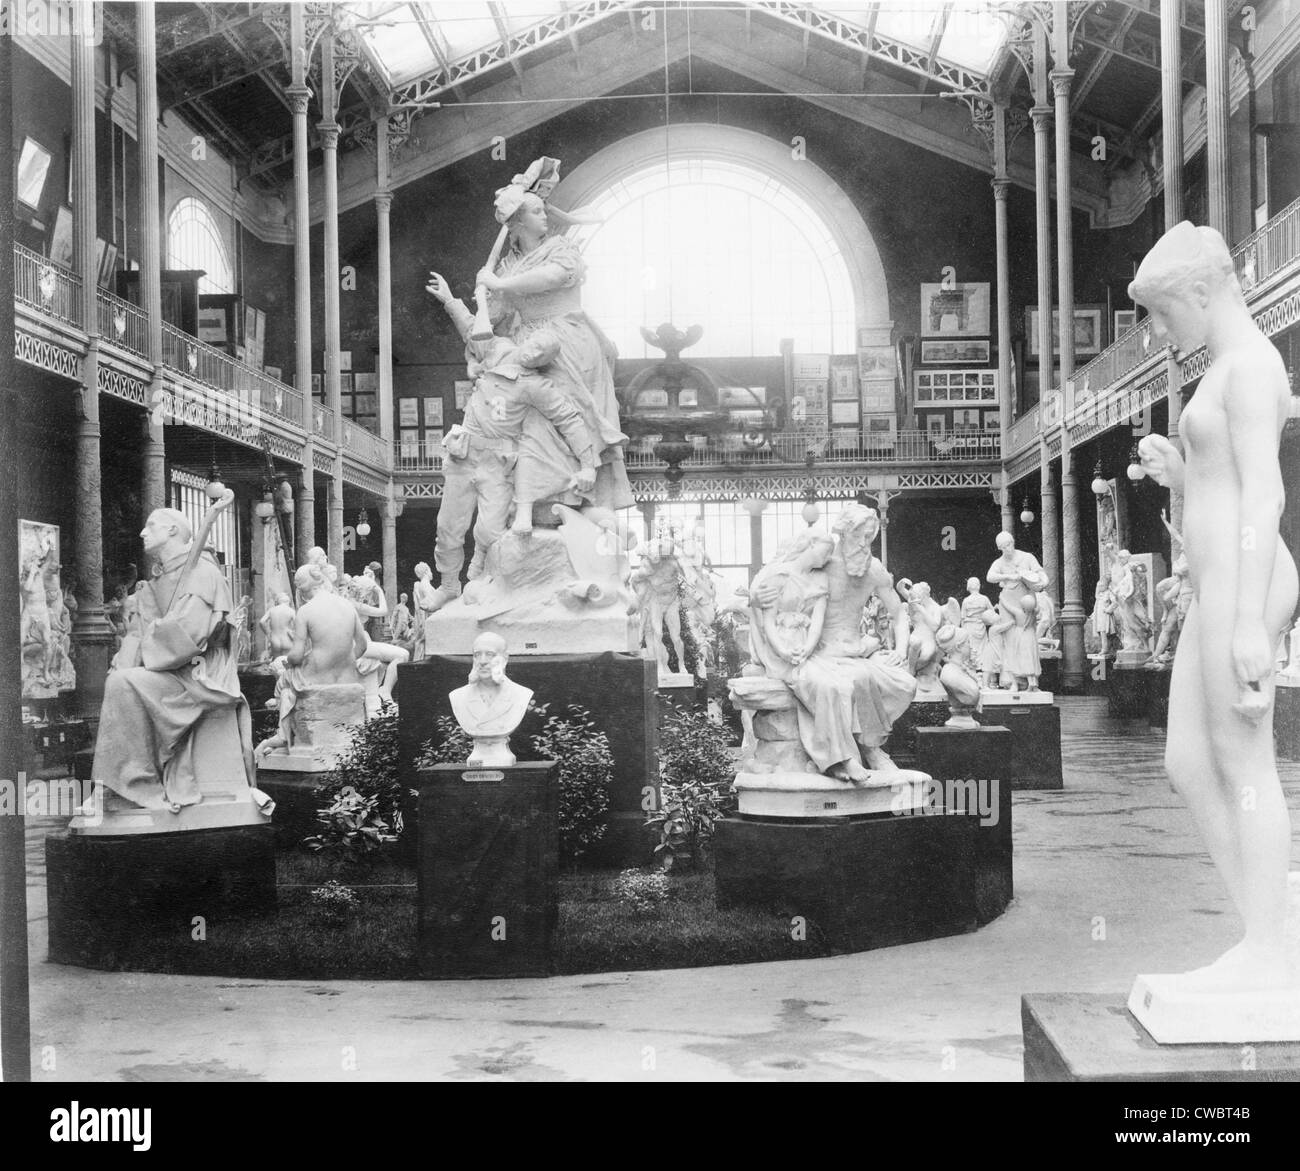 Beaux arts sculpture exhibited in the Gallery Rapp, Palace of Fine Arts, Paris Exposition, 1889. Stock Photo